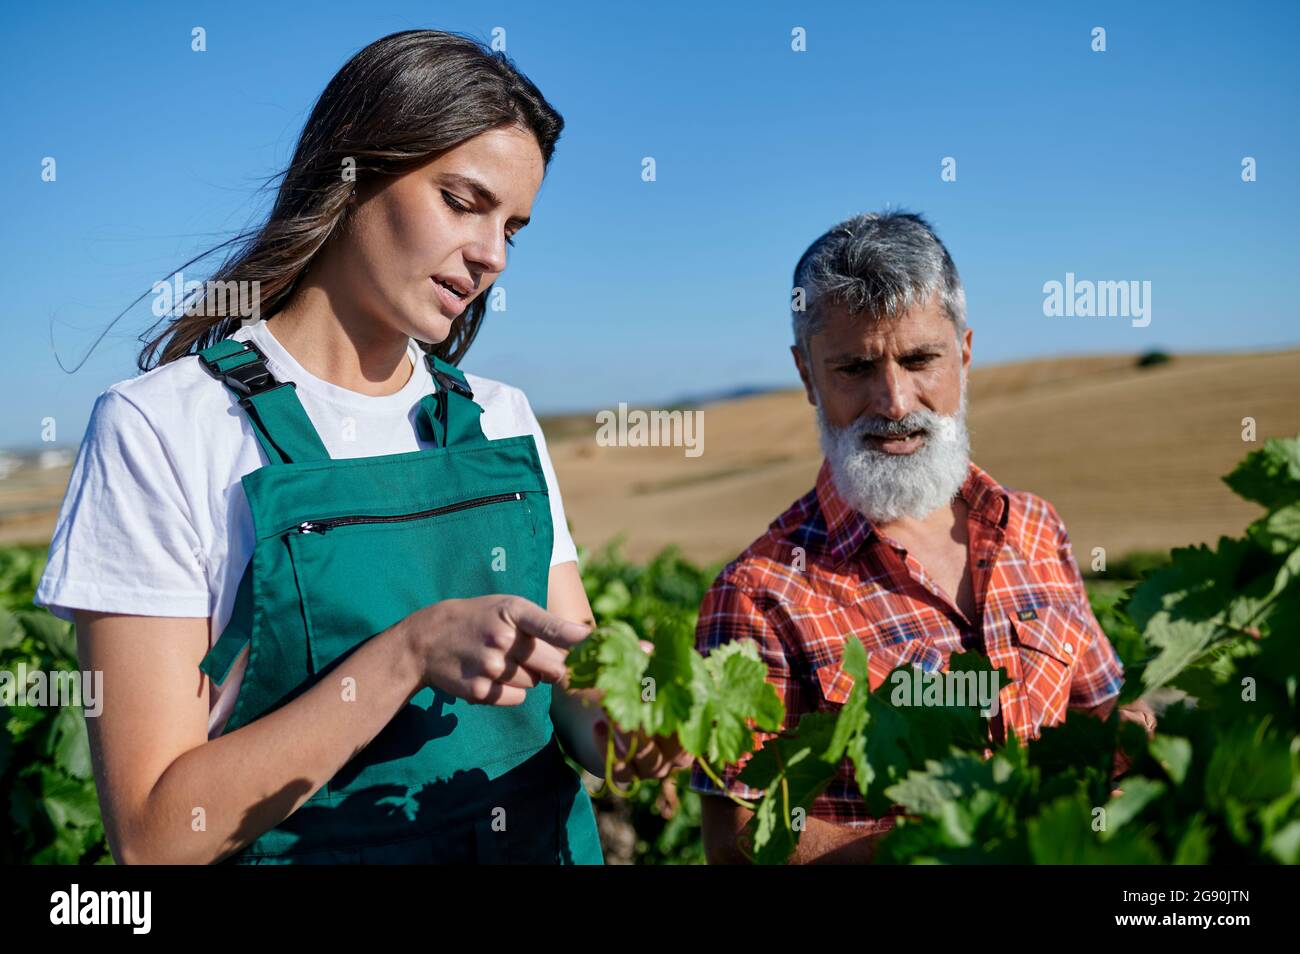 Female farmer talking with man while examining vine plant on sunny day Stock Photo